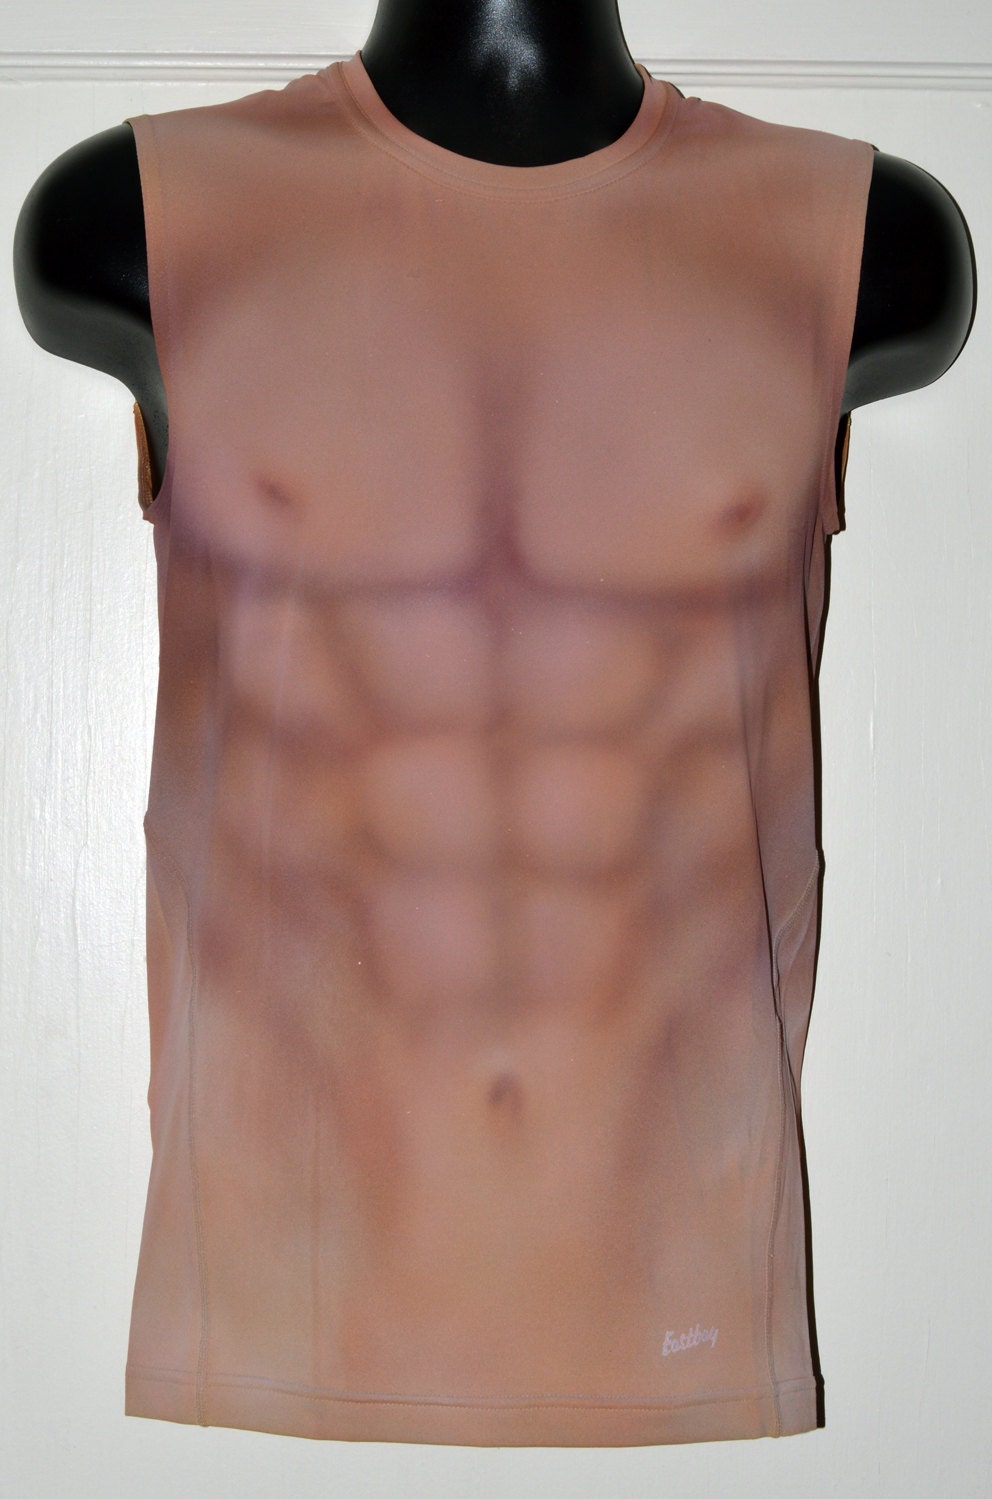 M Airbrushed Muscle Shirt Cosplay Crossplay Male Torso Chest